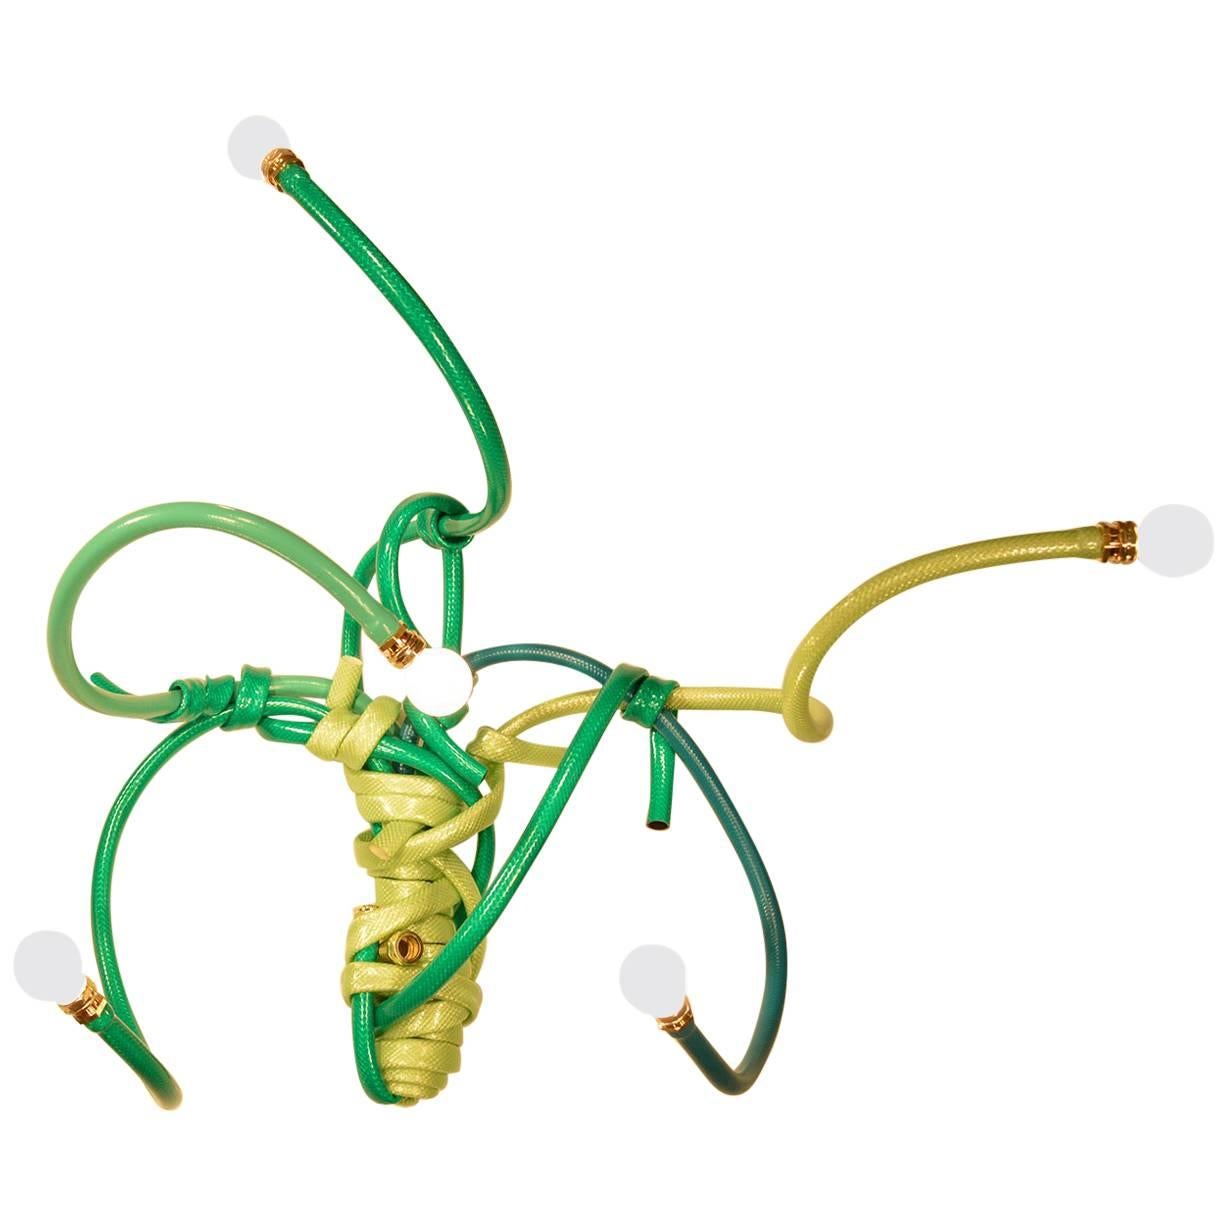 Sconce Style Lighting Fixture Made from Garden Hoses of Varying Shades of Green For Sale